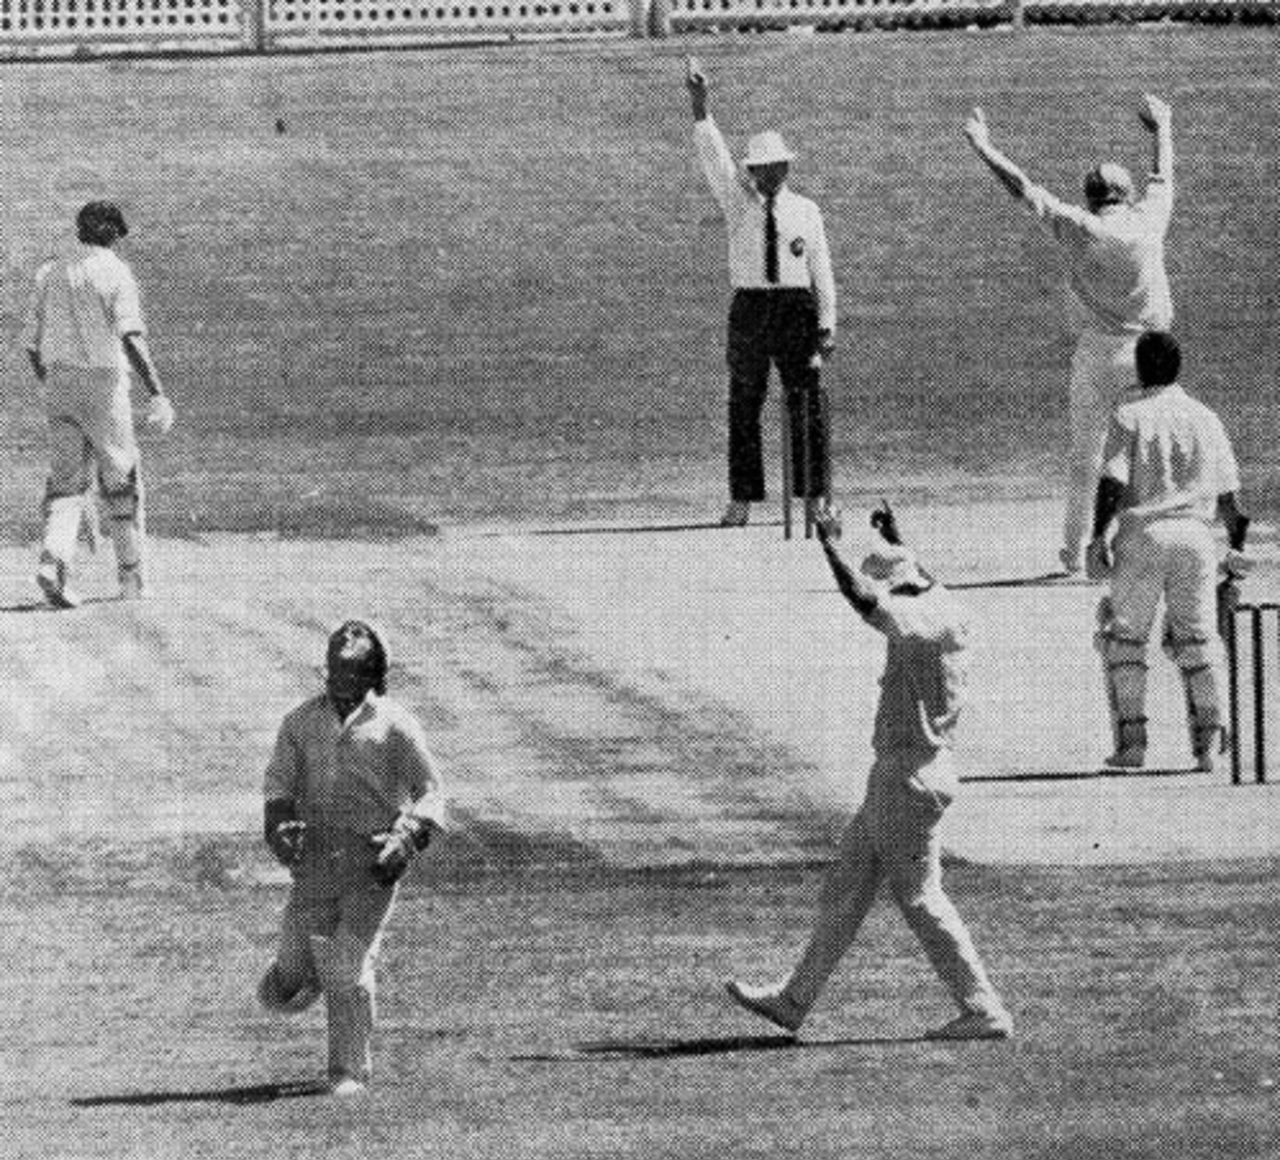 Ross Duncan caught by Bob Taylor for 0 off Tony Greig - Greig took 6 for 30 in Australia's first innings, Australia v World XI, Adelaide, February 1972